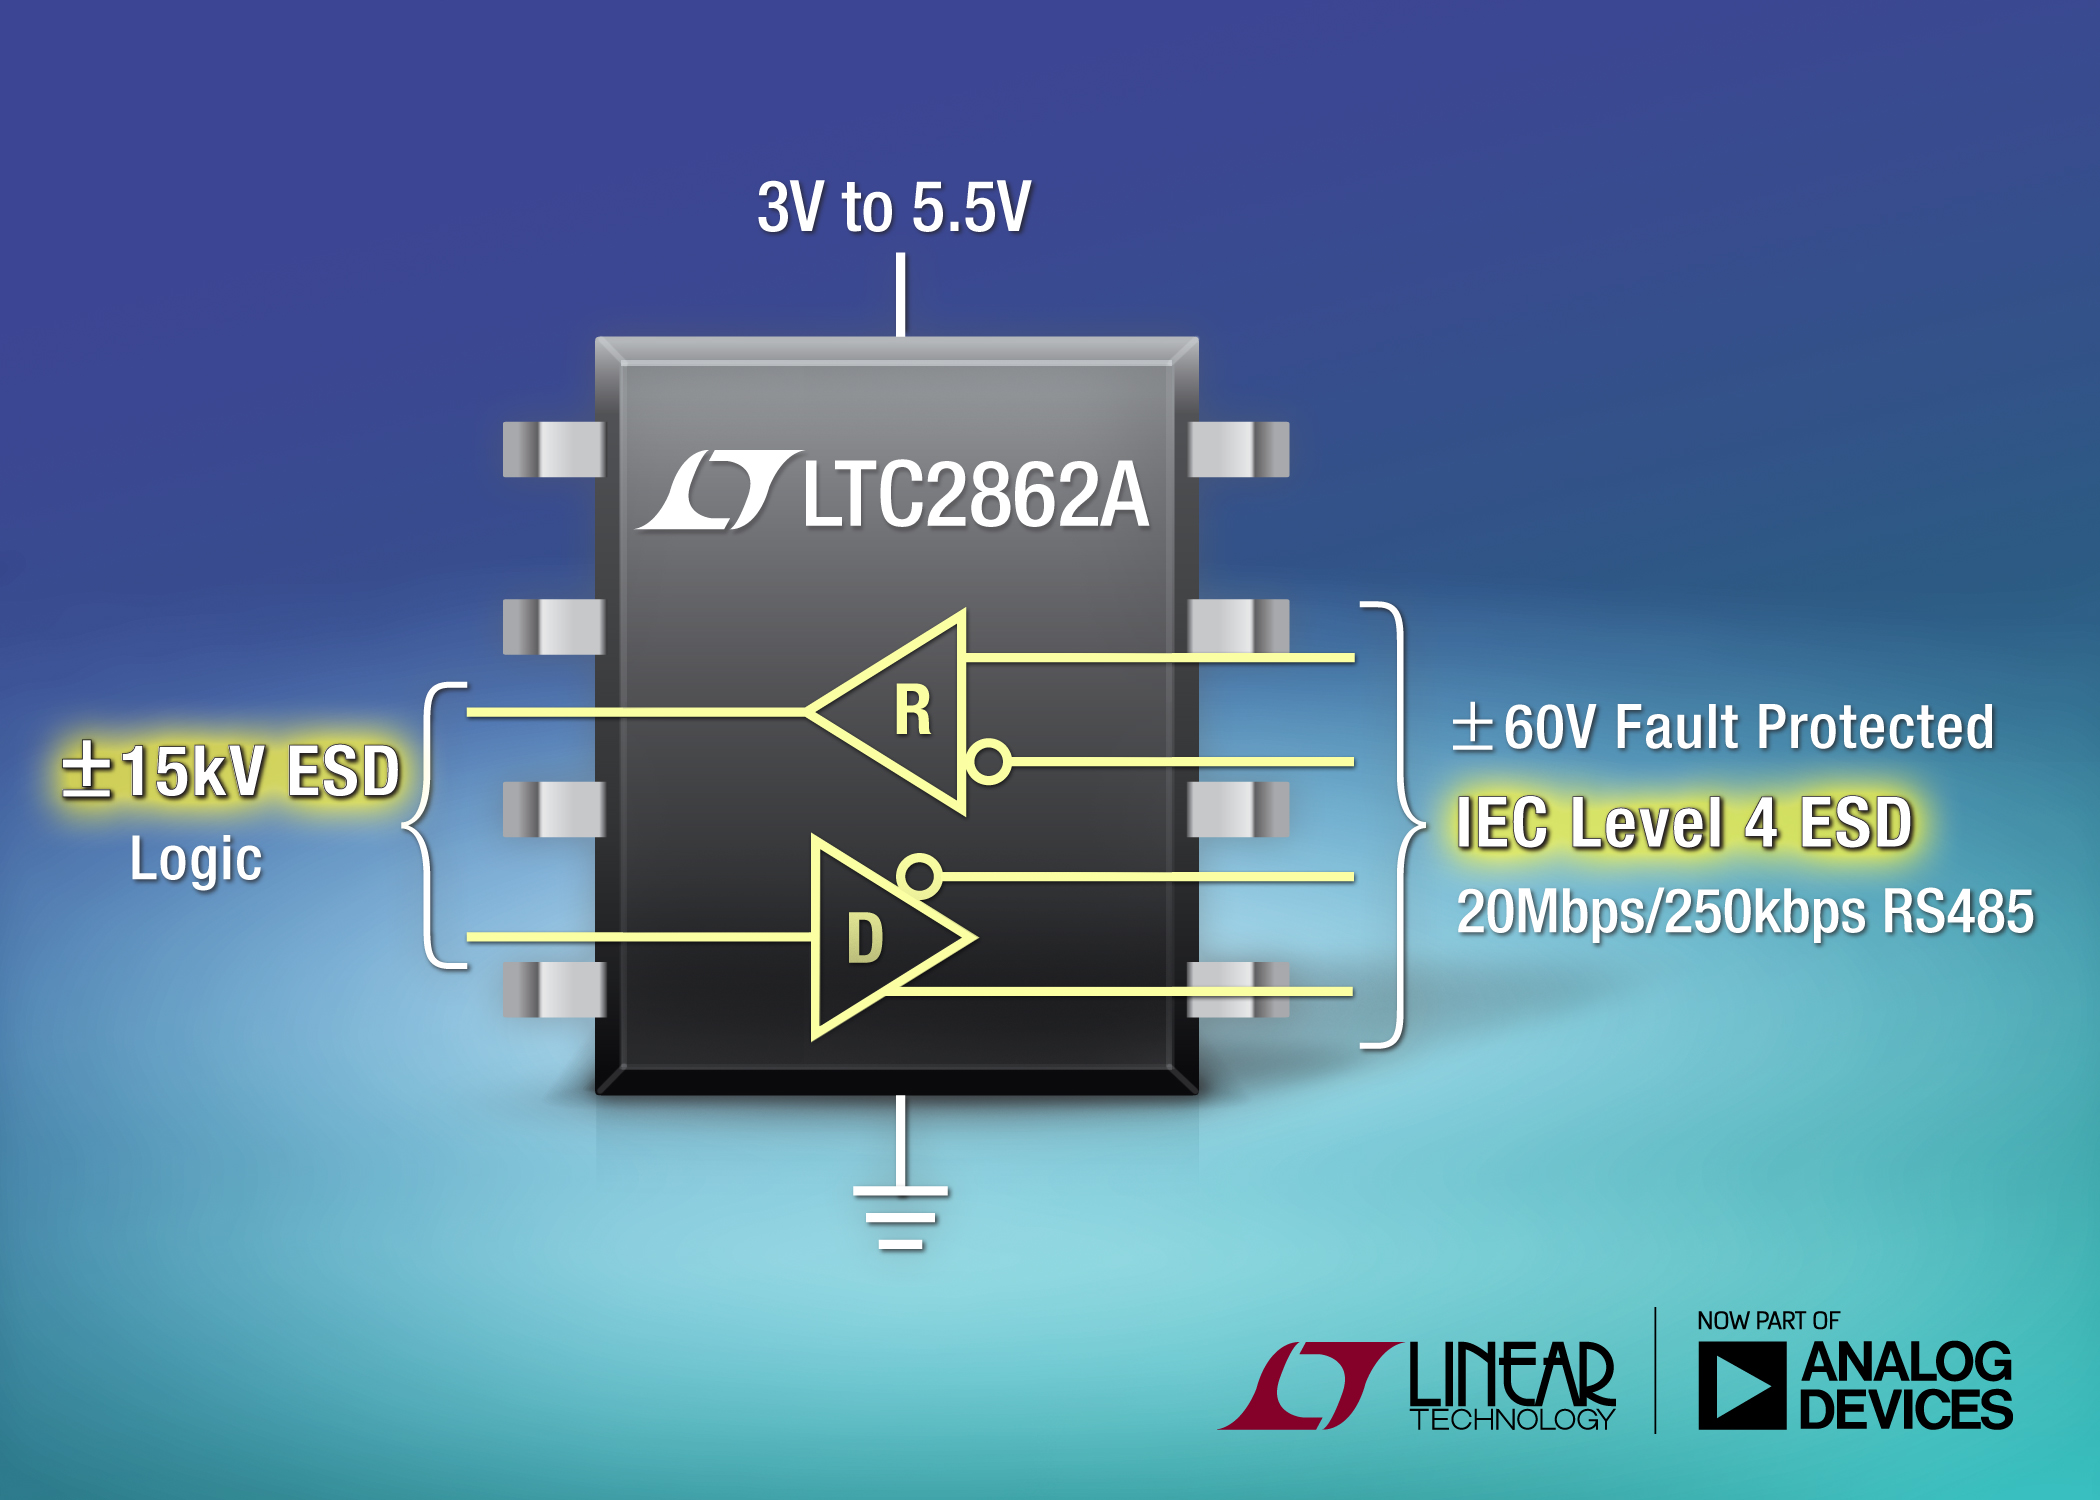 Rugged RS485 Transceiver Meets IEC Level 4 ESD Standard